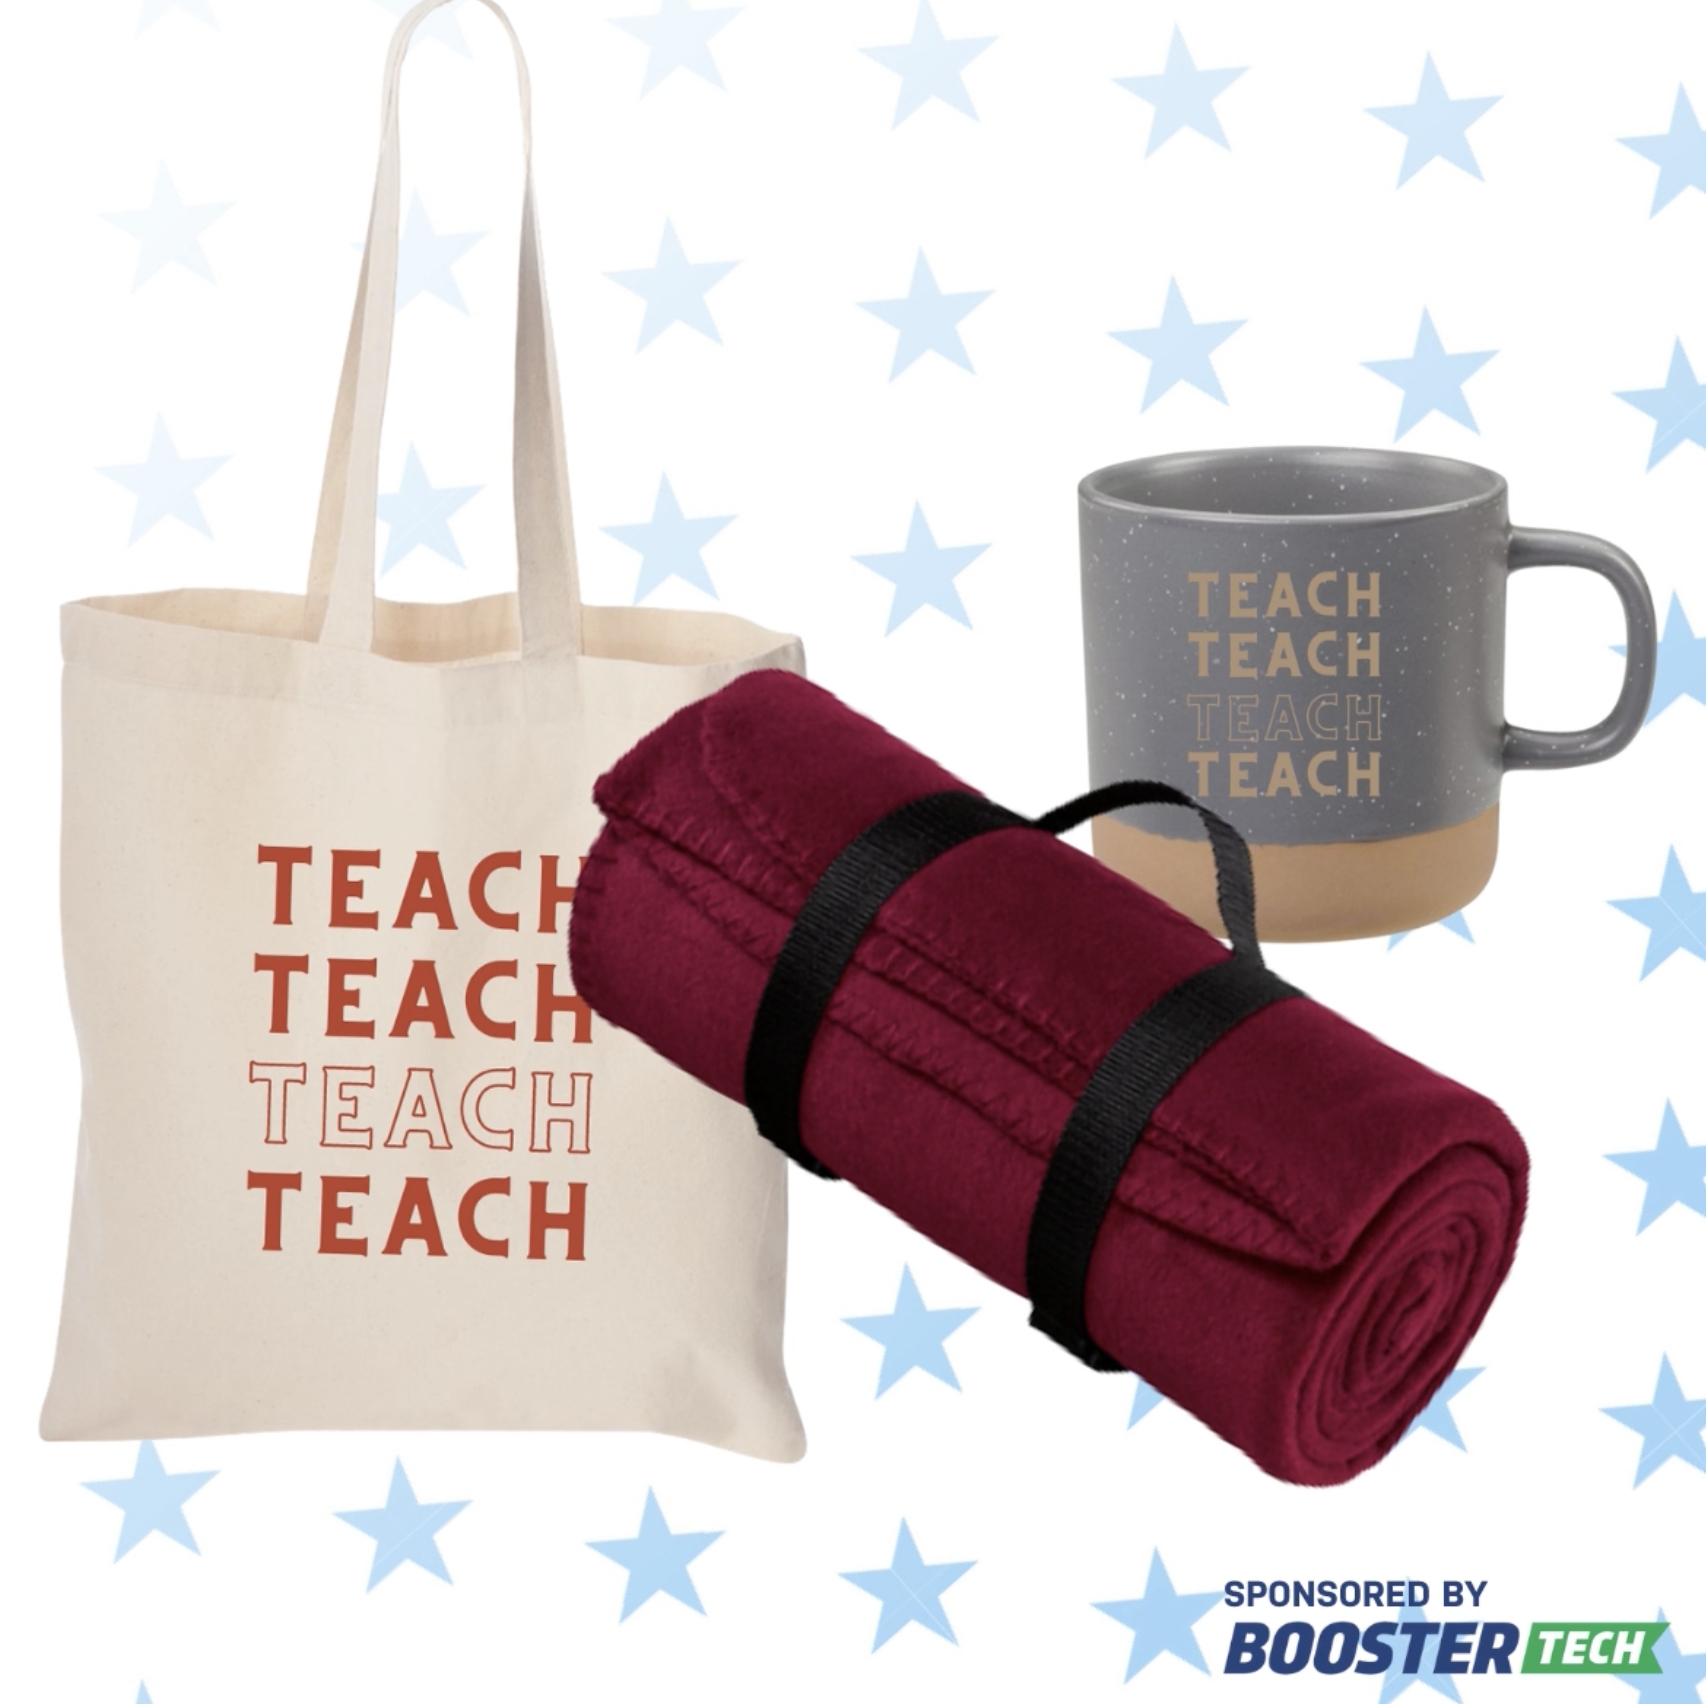 Enter to win cozy gifts for teachers